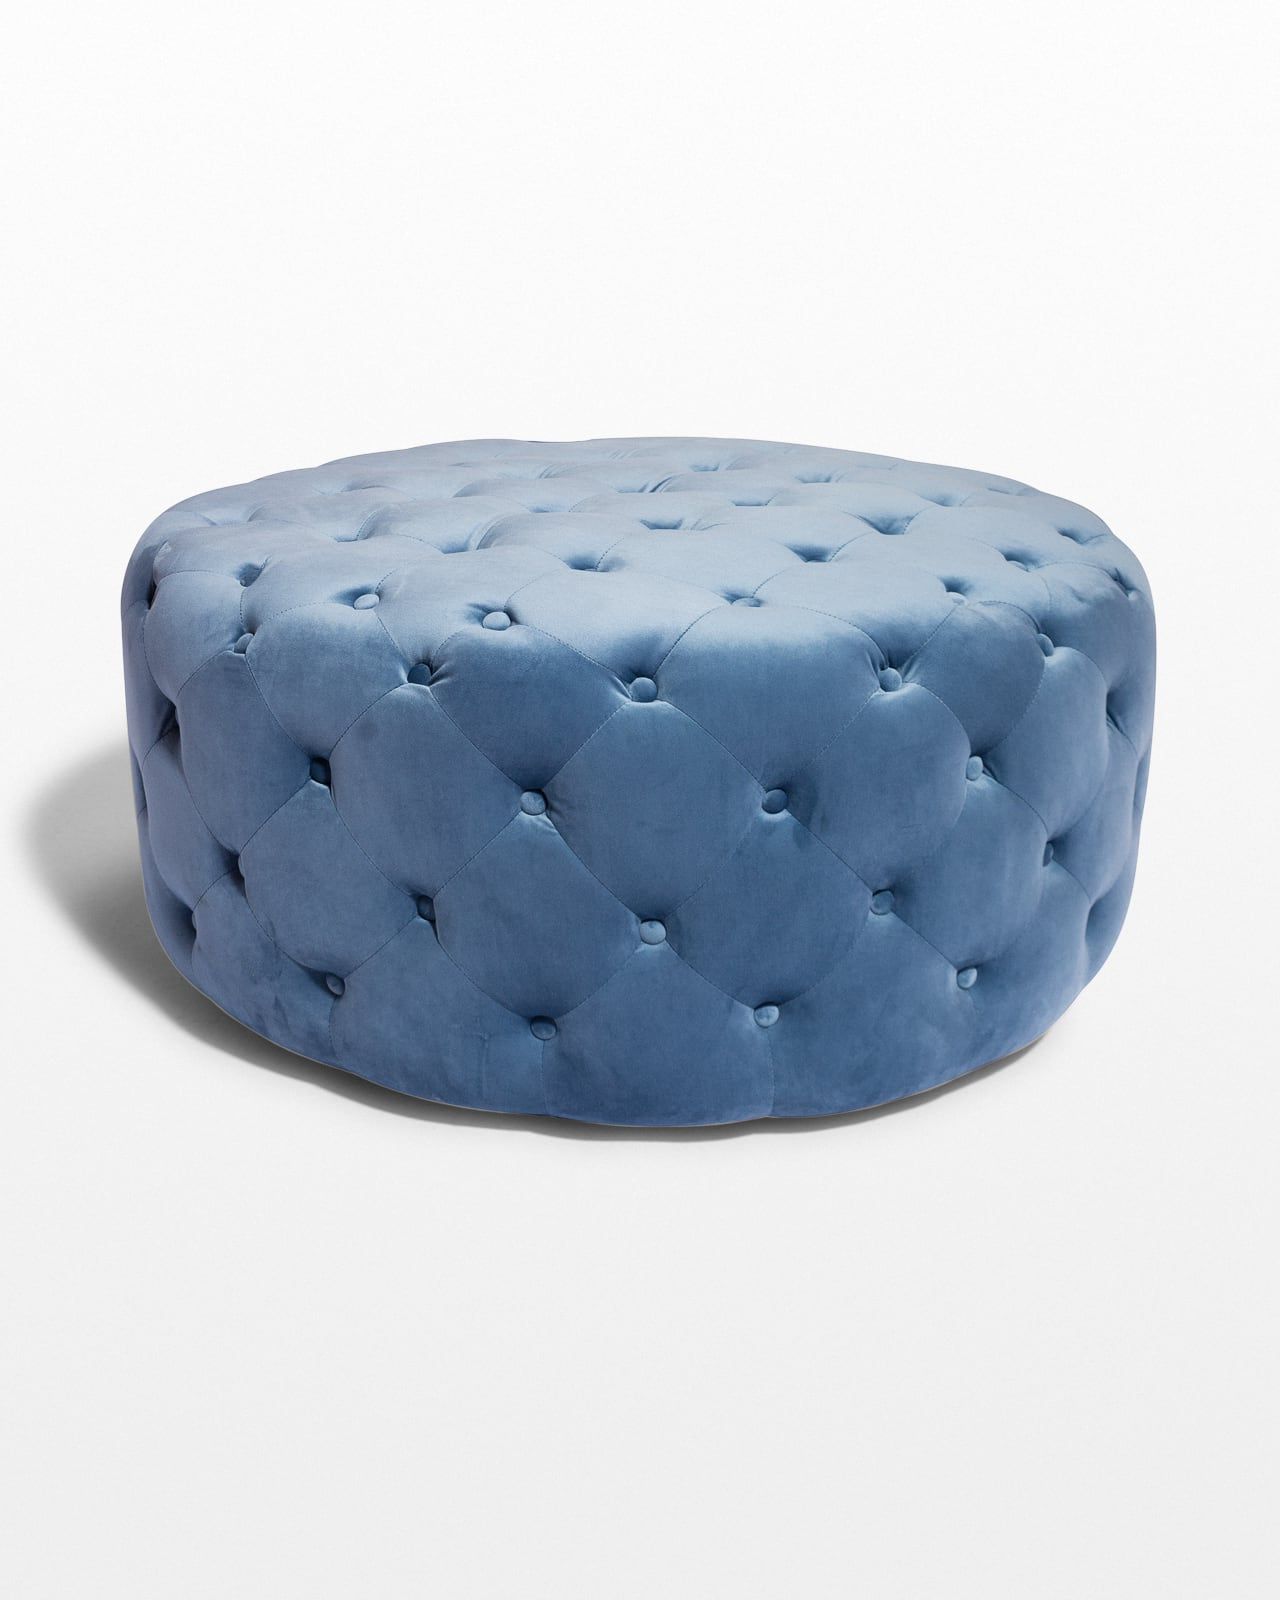 Newest Co083 April Tufted Sky Blue Velvet Round Ottoman Prop Rental (View 8 of 10)